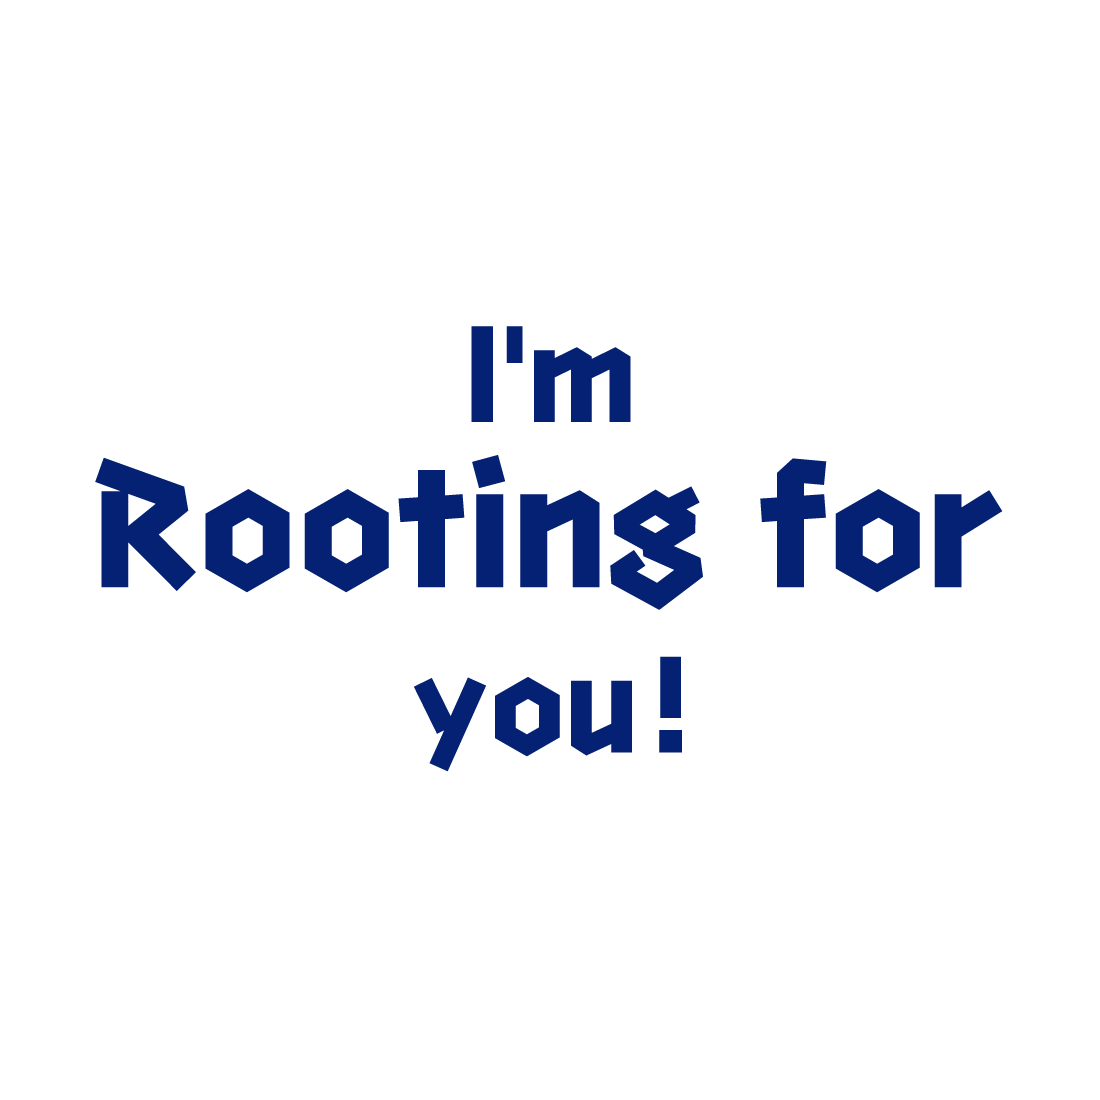 I'm Rooting for you!